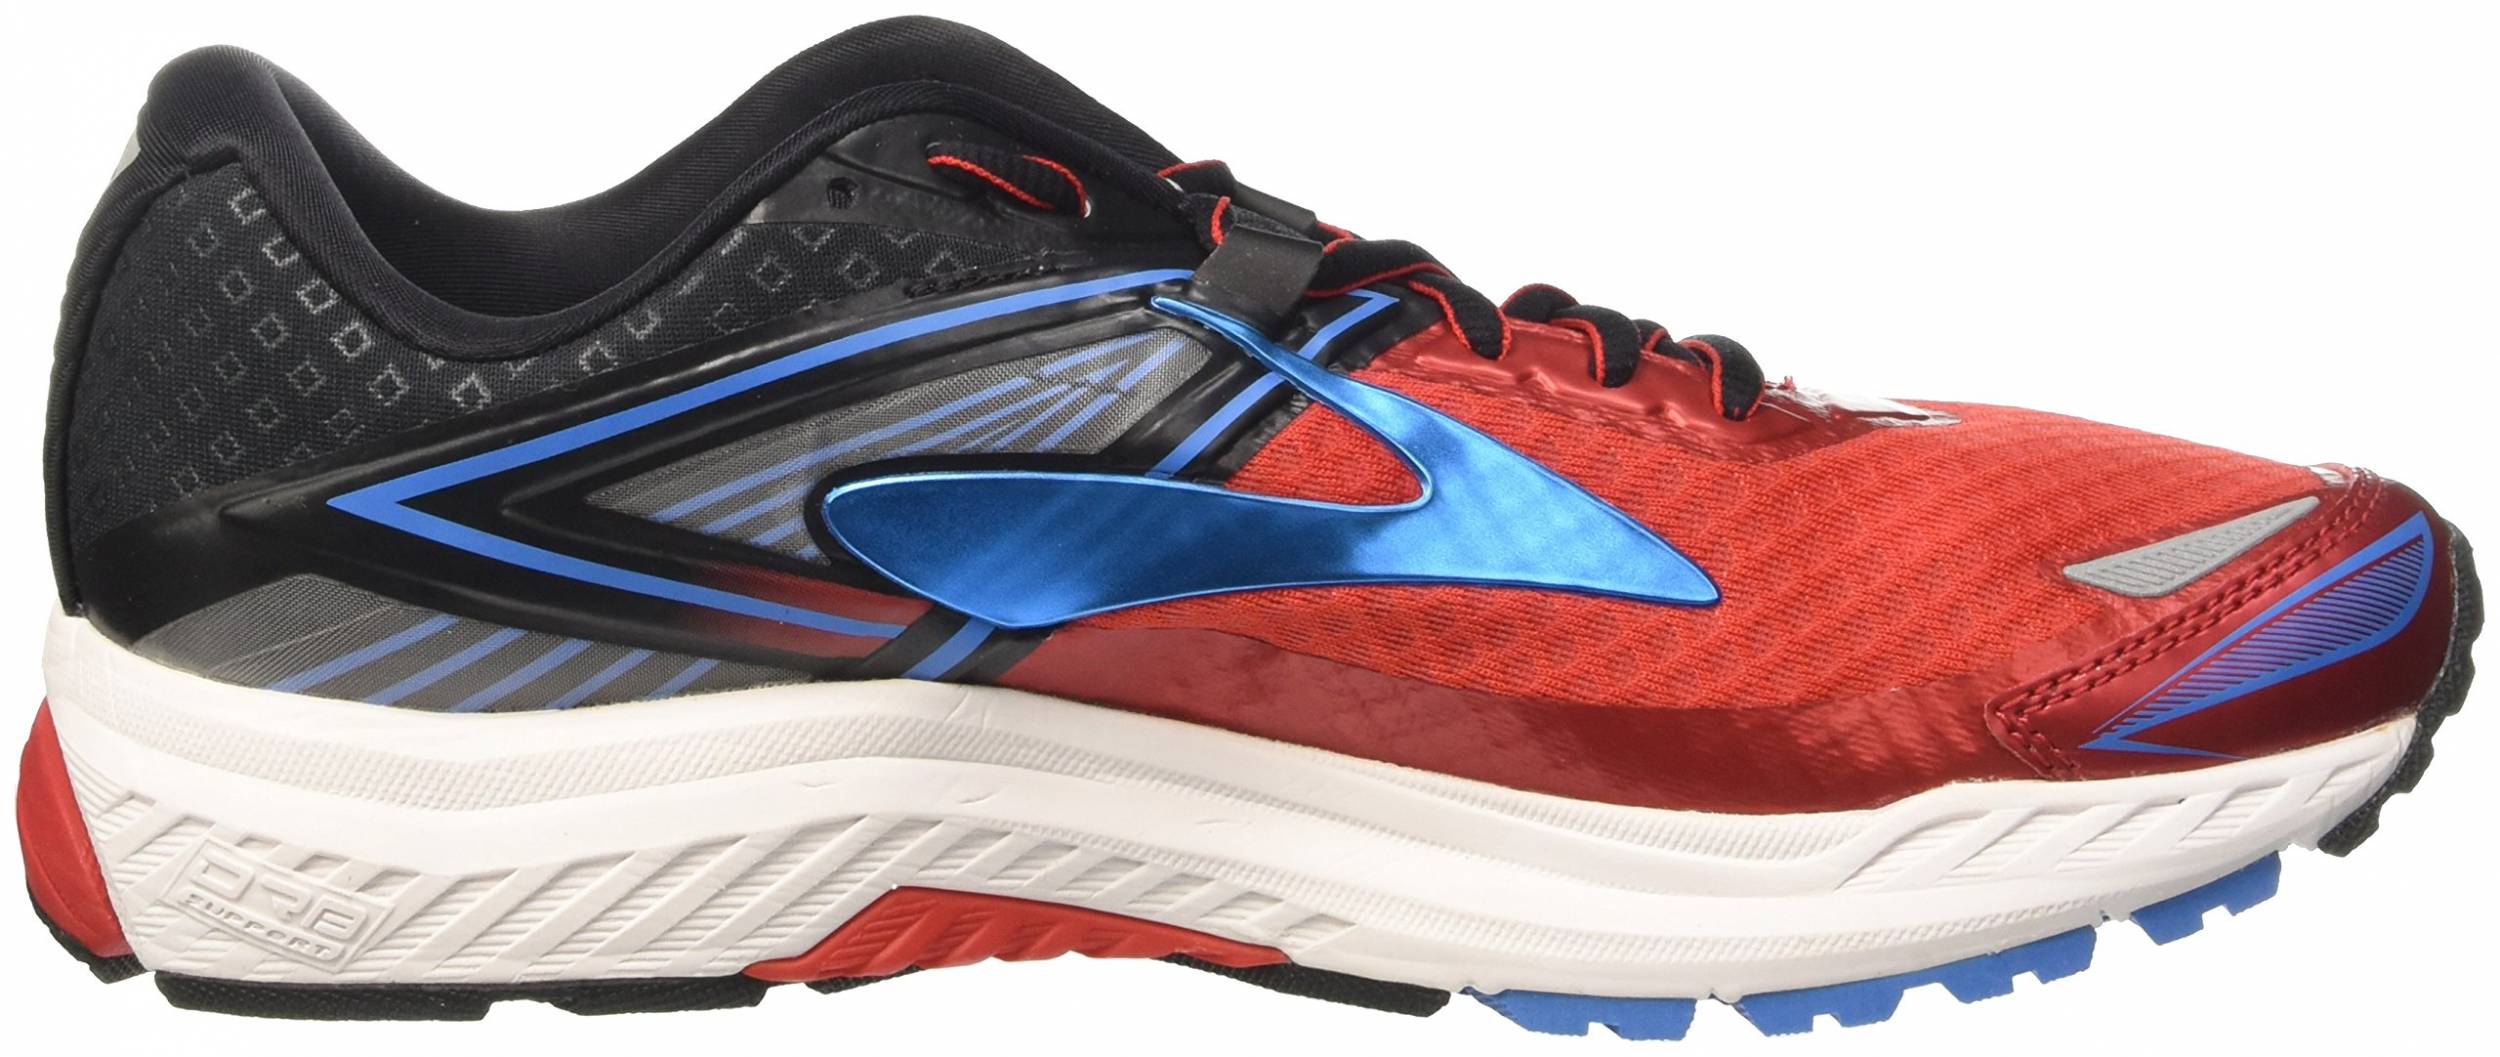 Only $105 + Review of Brooks Ravenna 8 